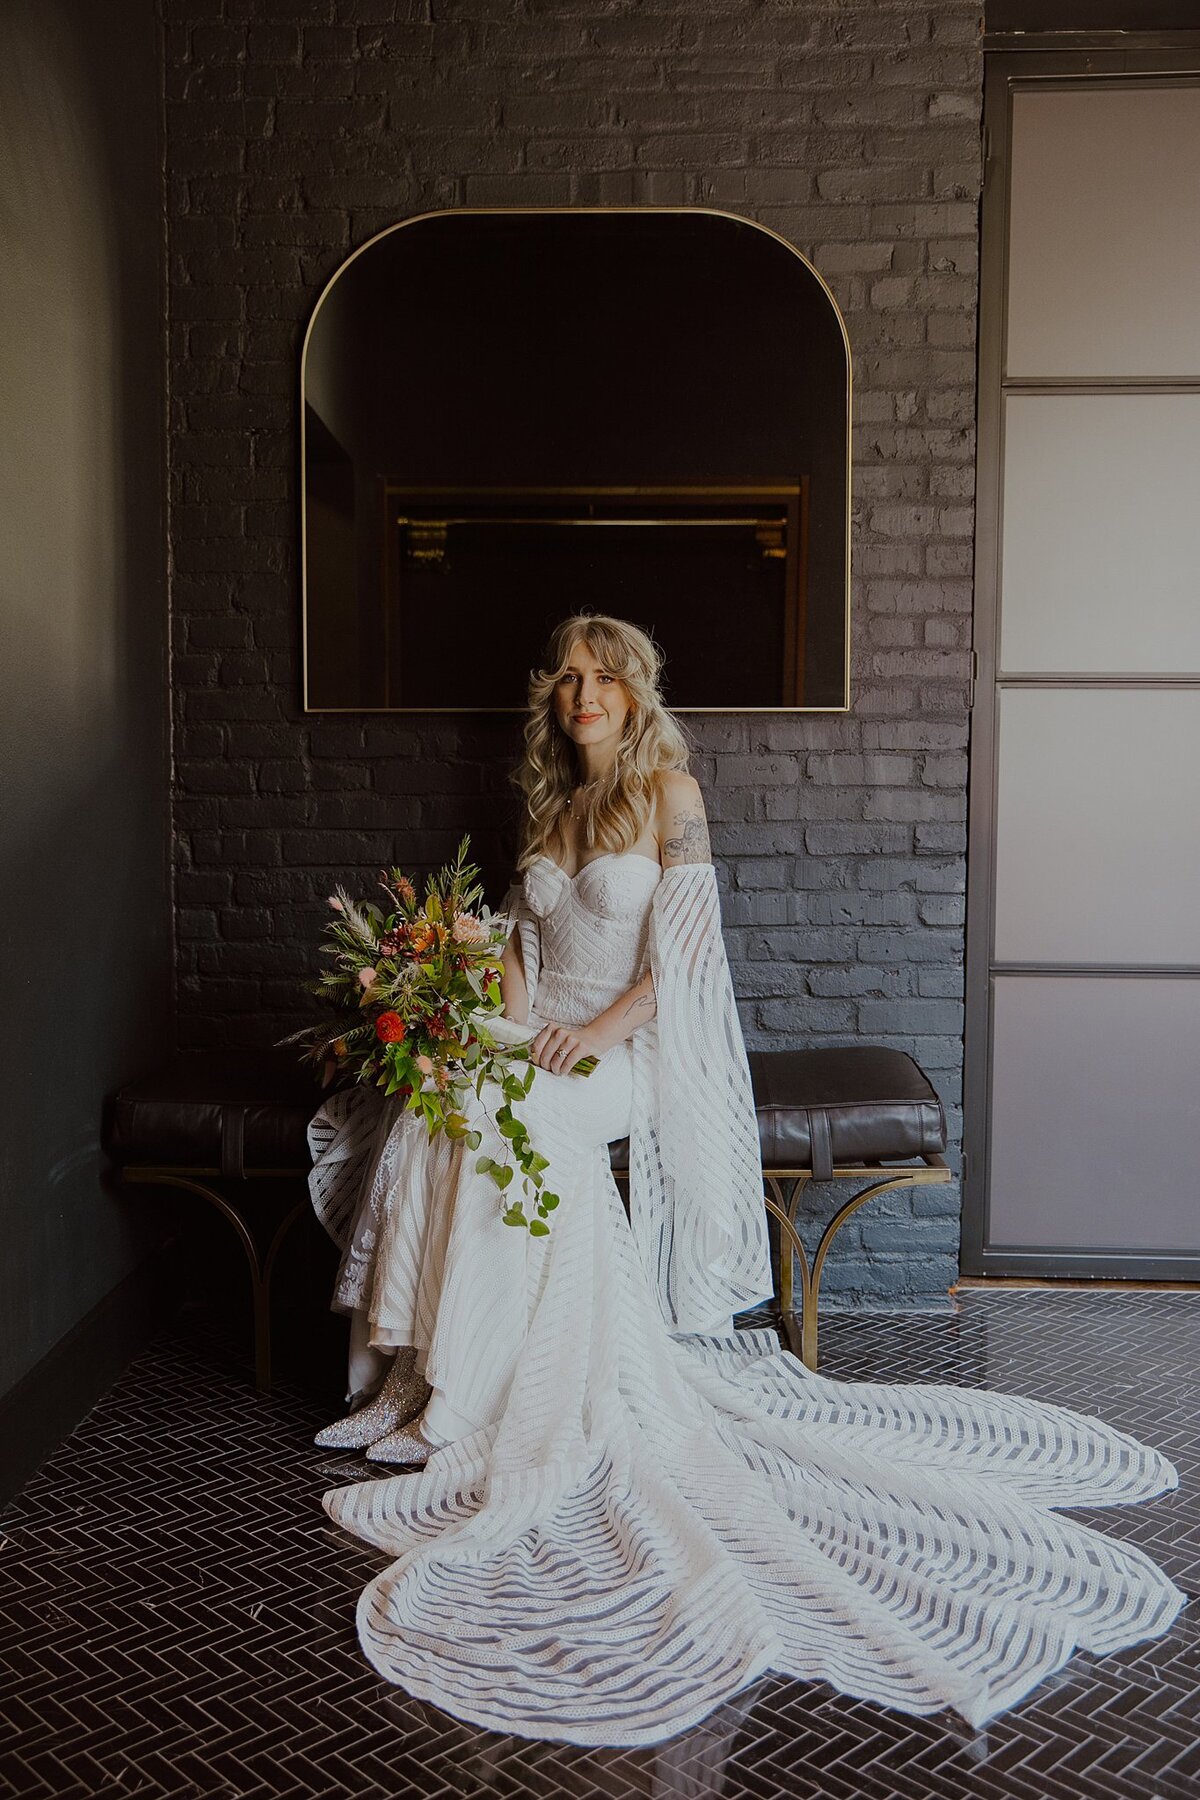 Boho bride in a strapless striped wedding dress with detached bell sleeves wearing white cowboy boots sits on a brass bench with a brown leather cushion holding a large cascade bouquet of orange, red and yellow flowers with a black herringbone tile floor in the foreground and exposed brown brick behind her at Clementine Nashville.